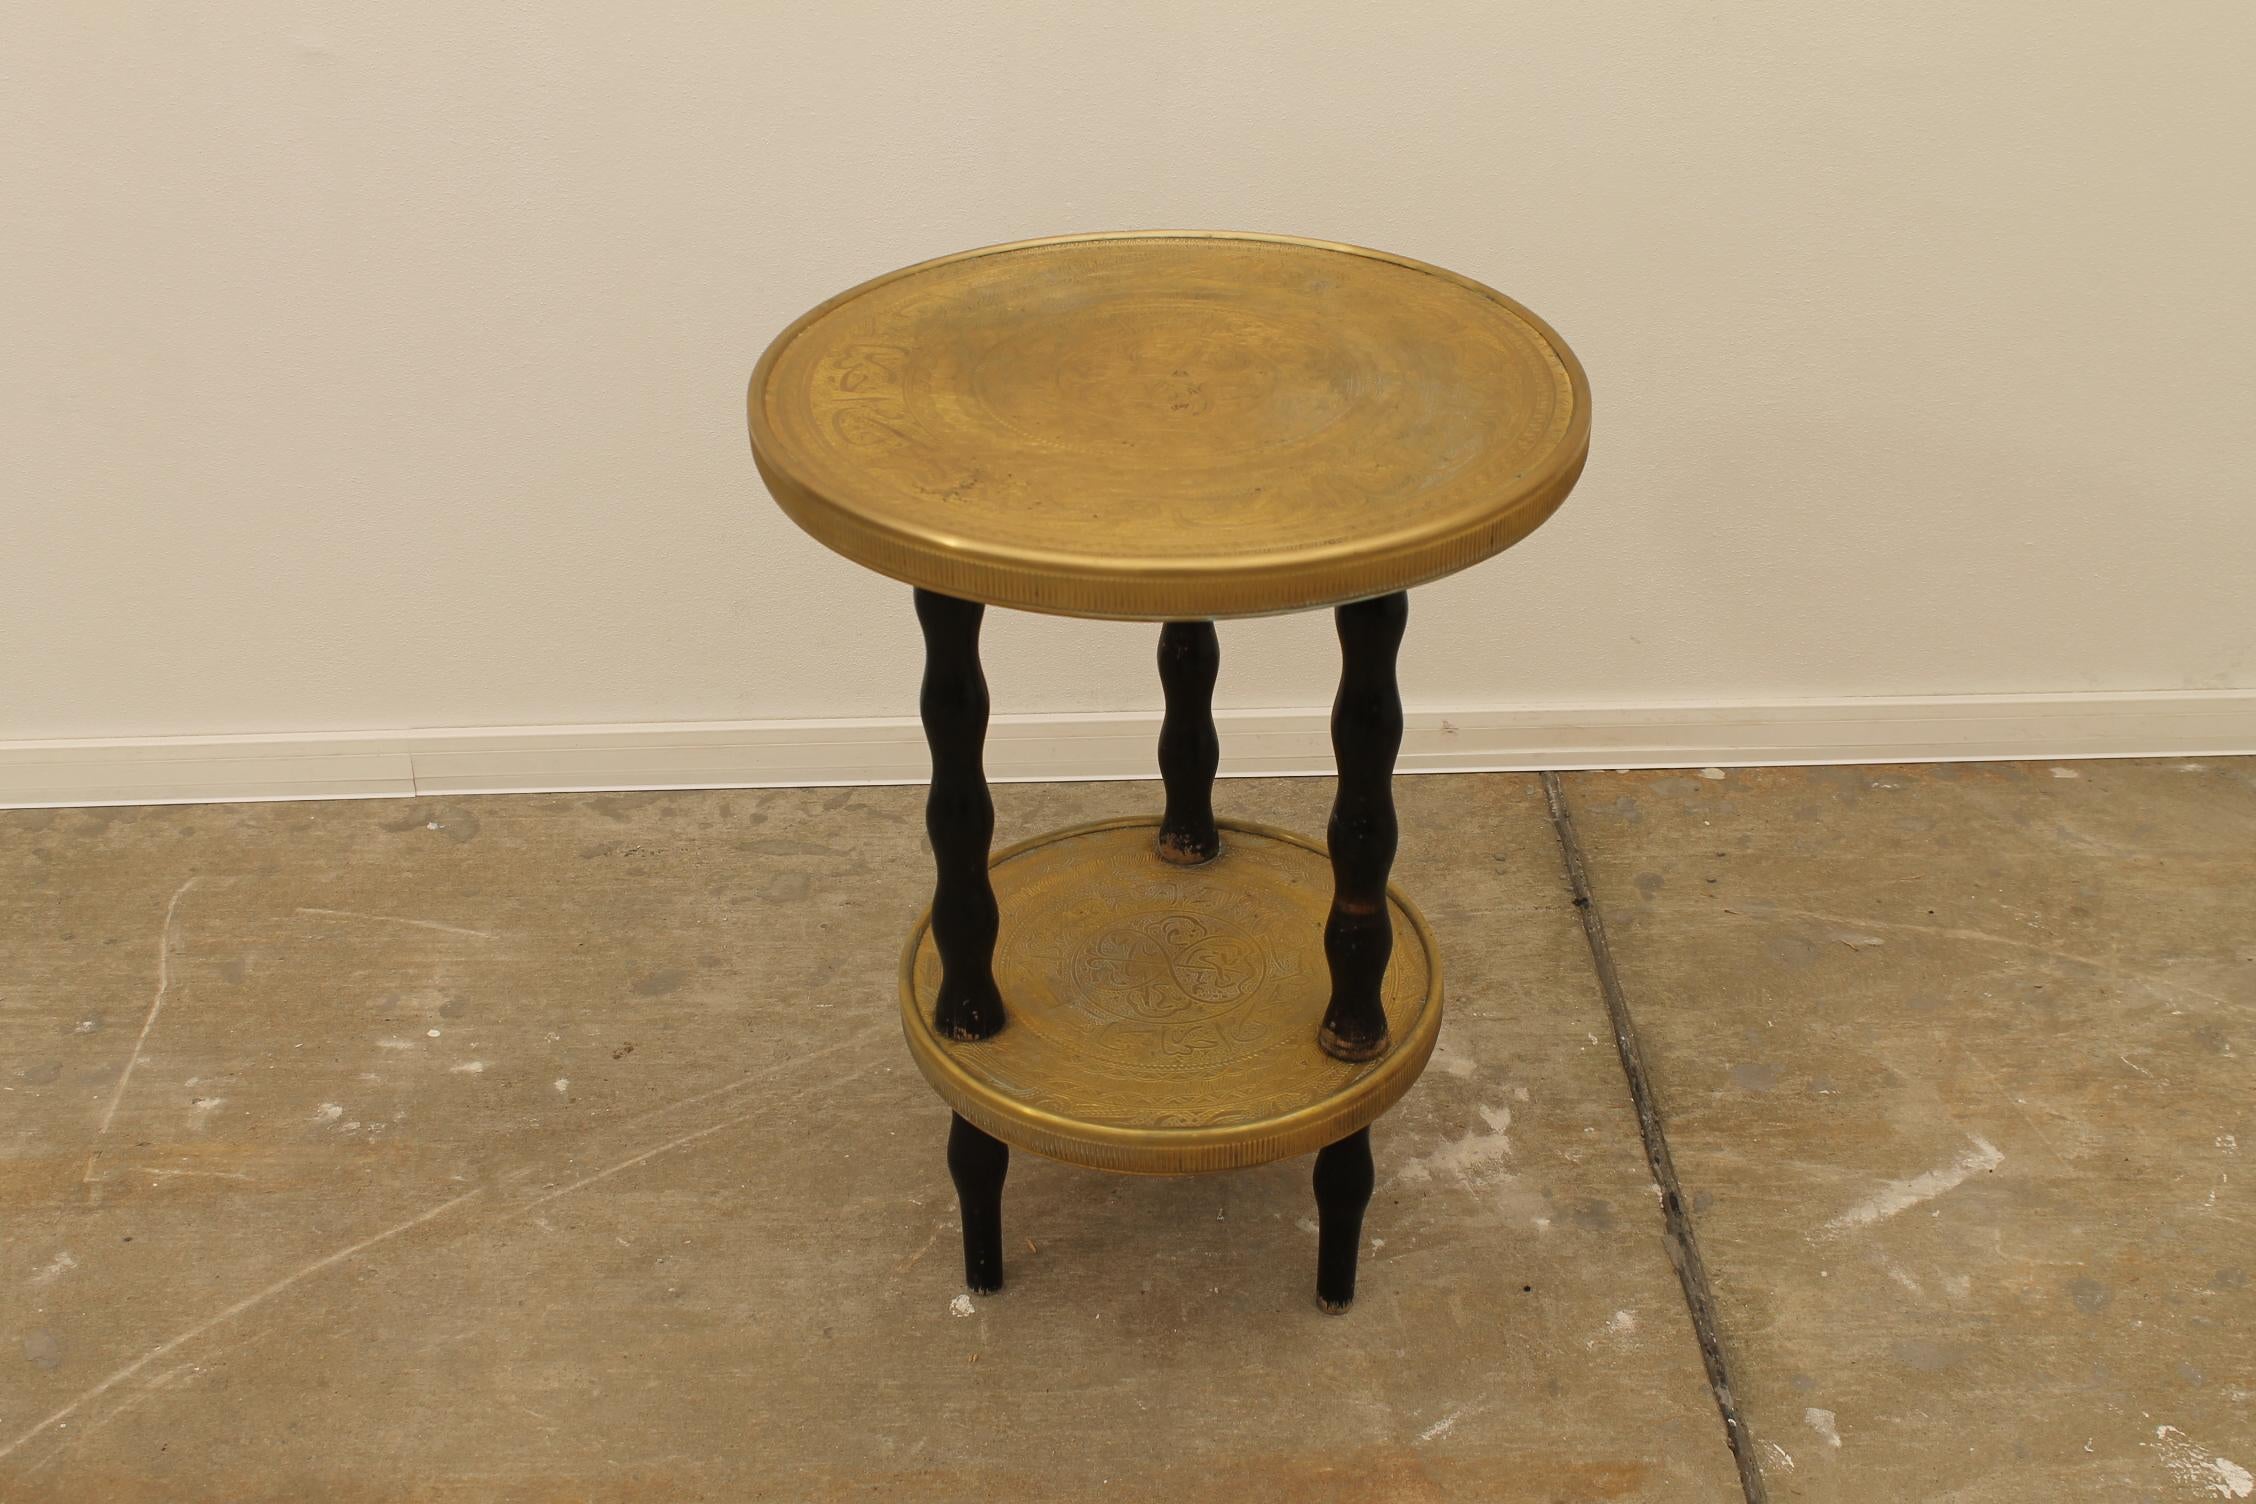 This side table was made around the 1930s and has a wooden structure, turned wavy walnut wooden legs painted black. The round table top is made of brass with engraved decorative motifs.
The table has a nice patina and is in its original,